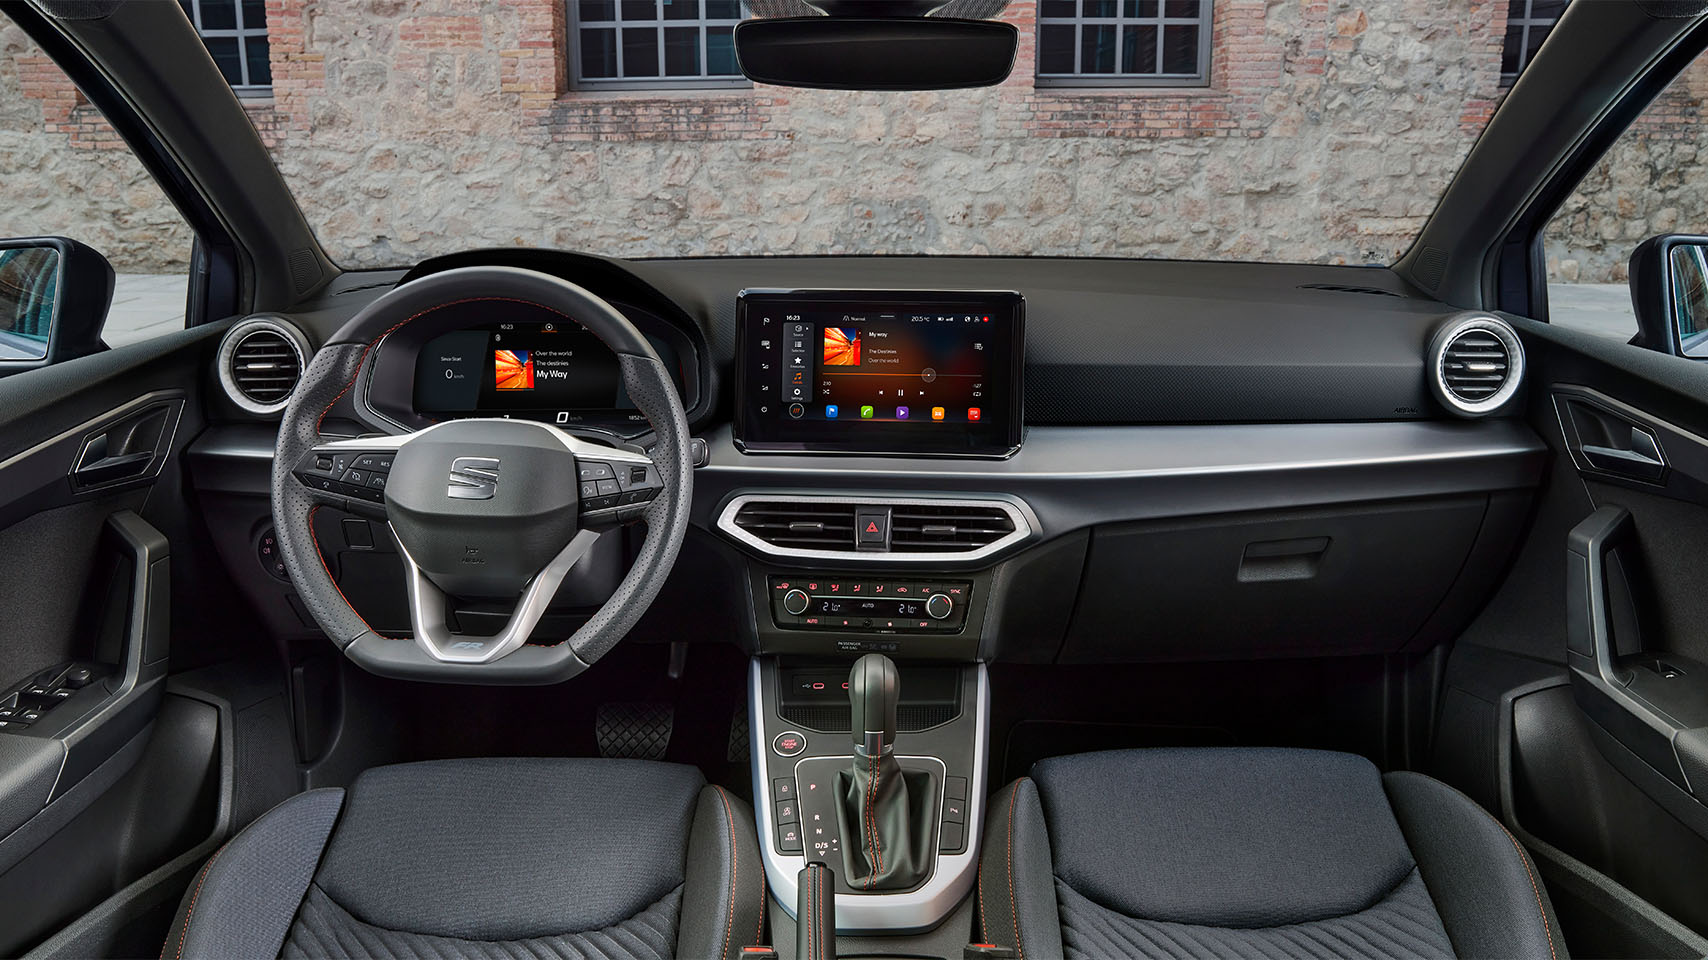 interior of seat ibiza anniversary limited edition, upholstery, driver and passenger seat, dashboard and infotainment system